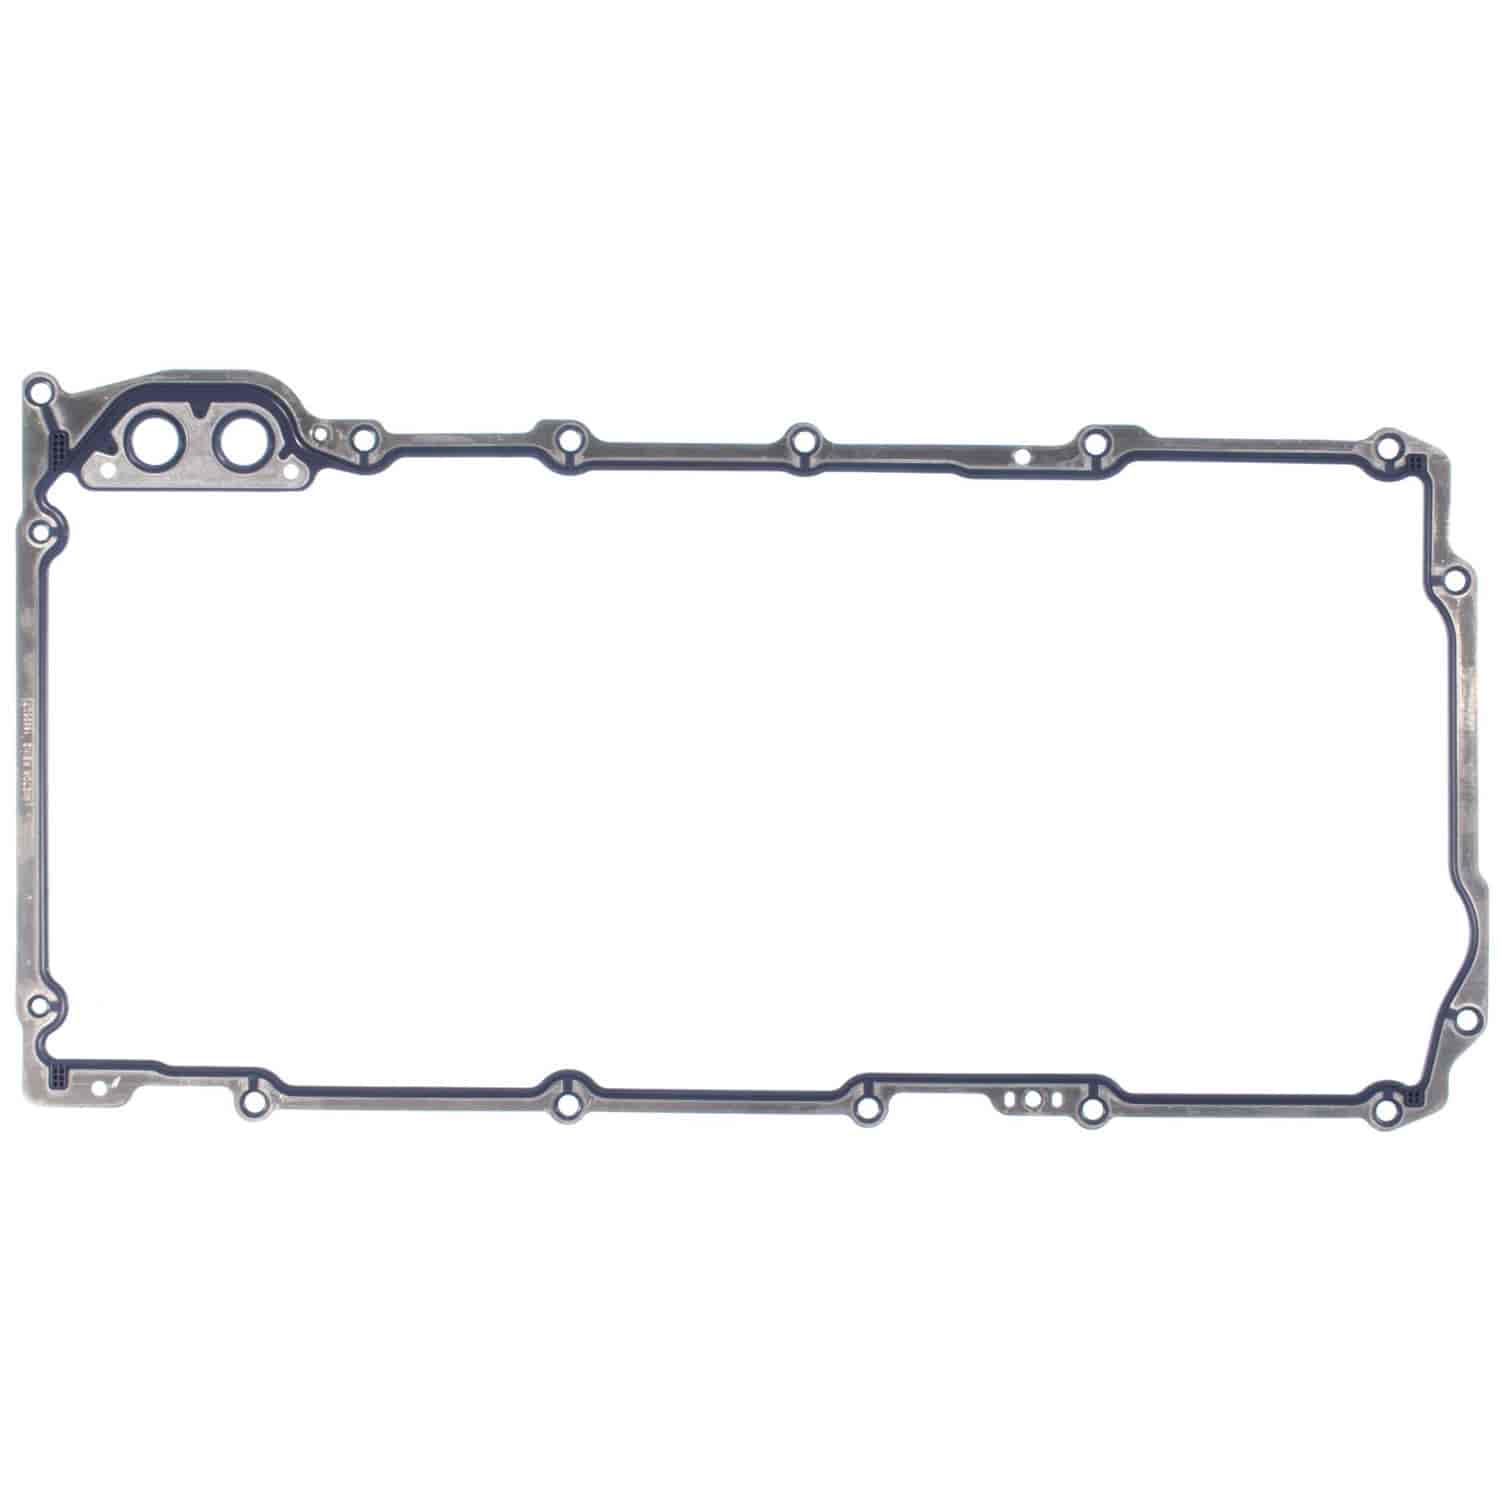 Oil Pan Gasket 1997-2014 Chevy LS V8 4.8/5.3/5.7/6.0/6.2/7.0L (LS1/LS2/LS3/LS6/LS7/LSA/LS9) in Molded Rubber